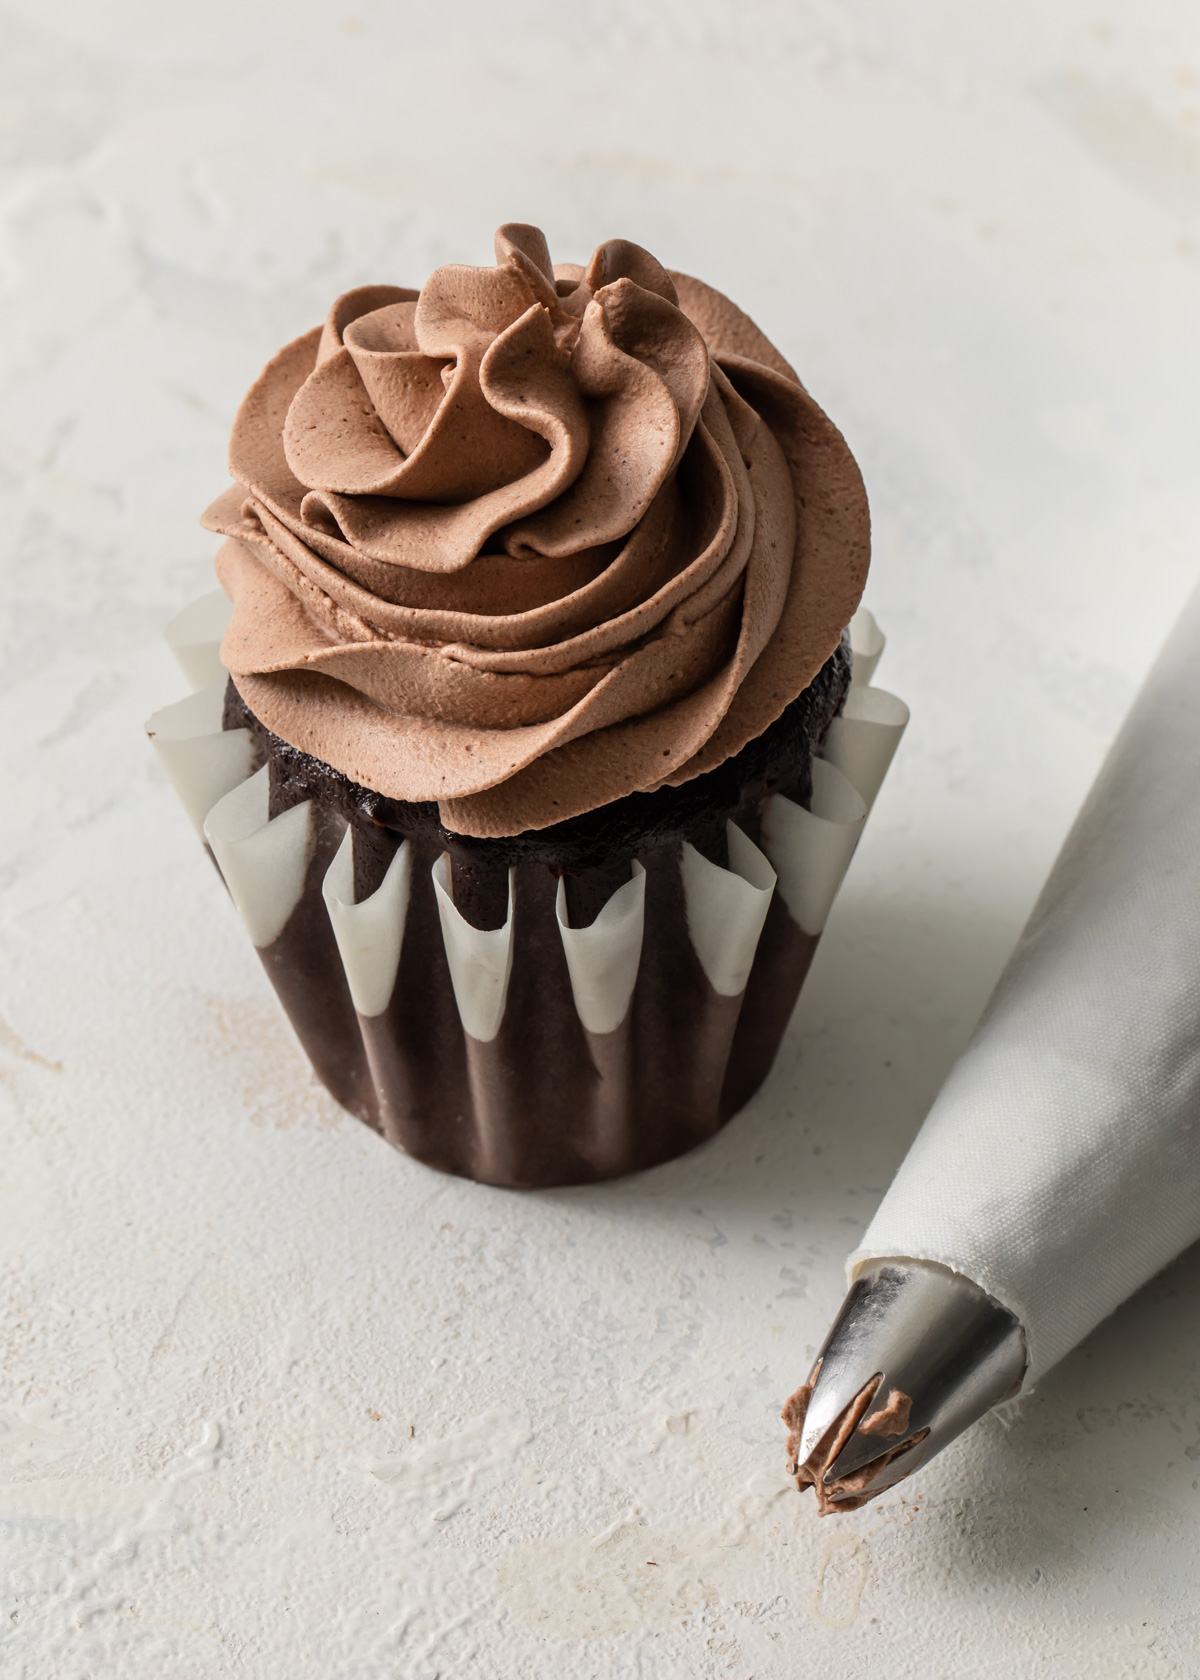 A single chocolate cupcakes with chocolate whipped cream swirled on top with a piping bag